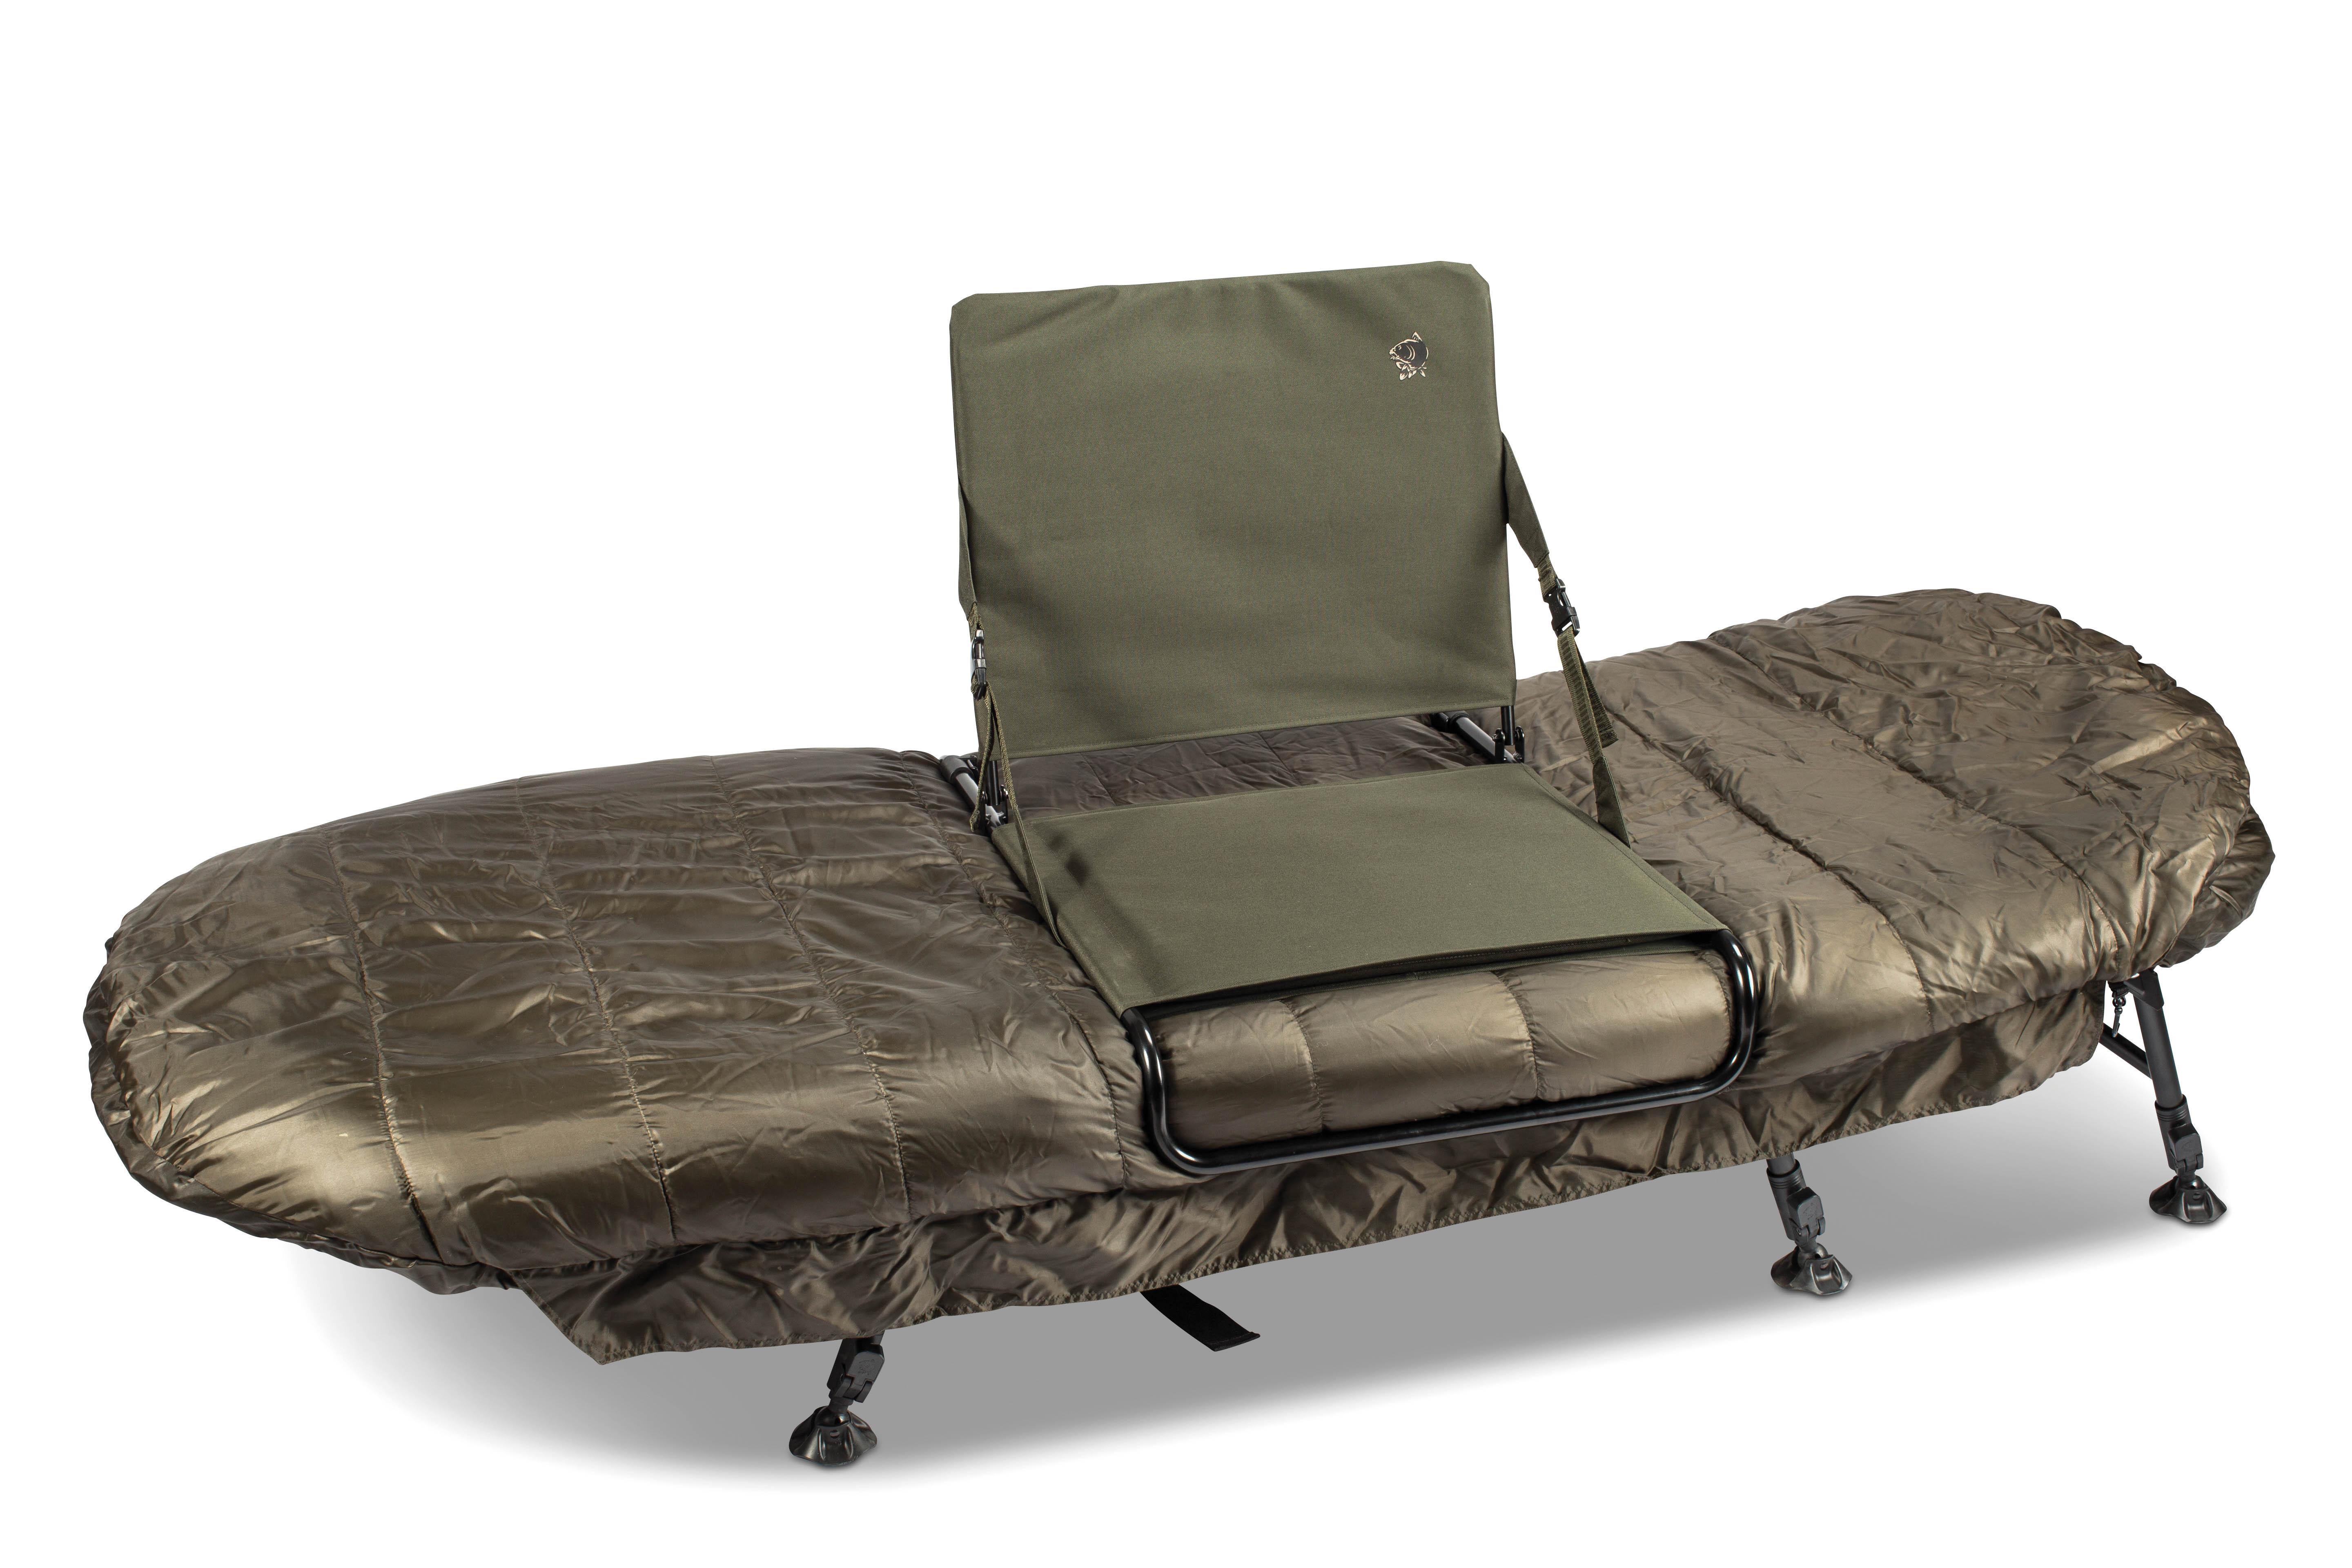 Second Hand Carp Fishing Bed Chair In Ireland